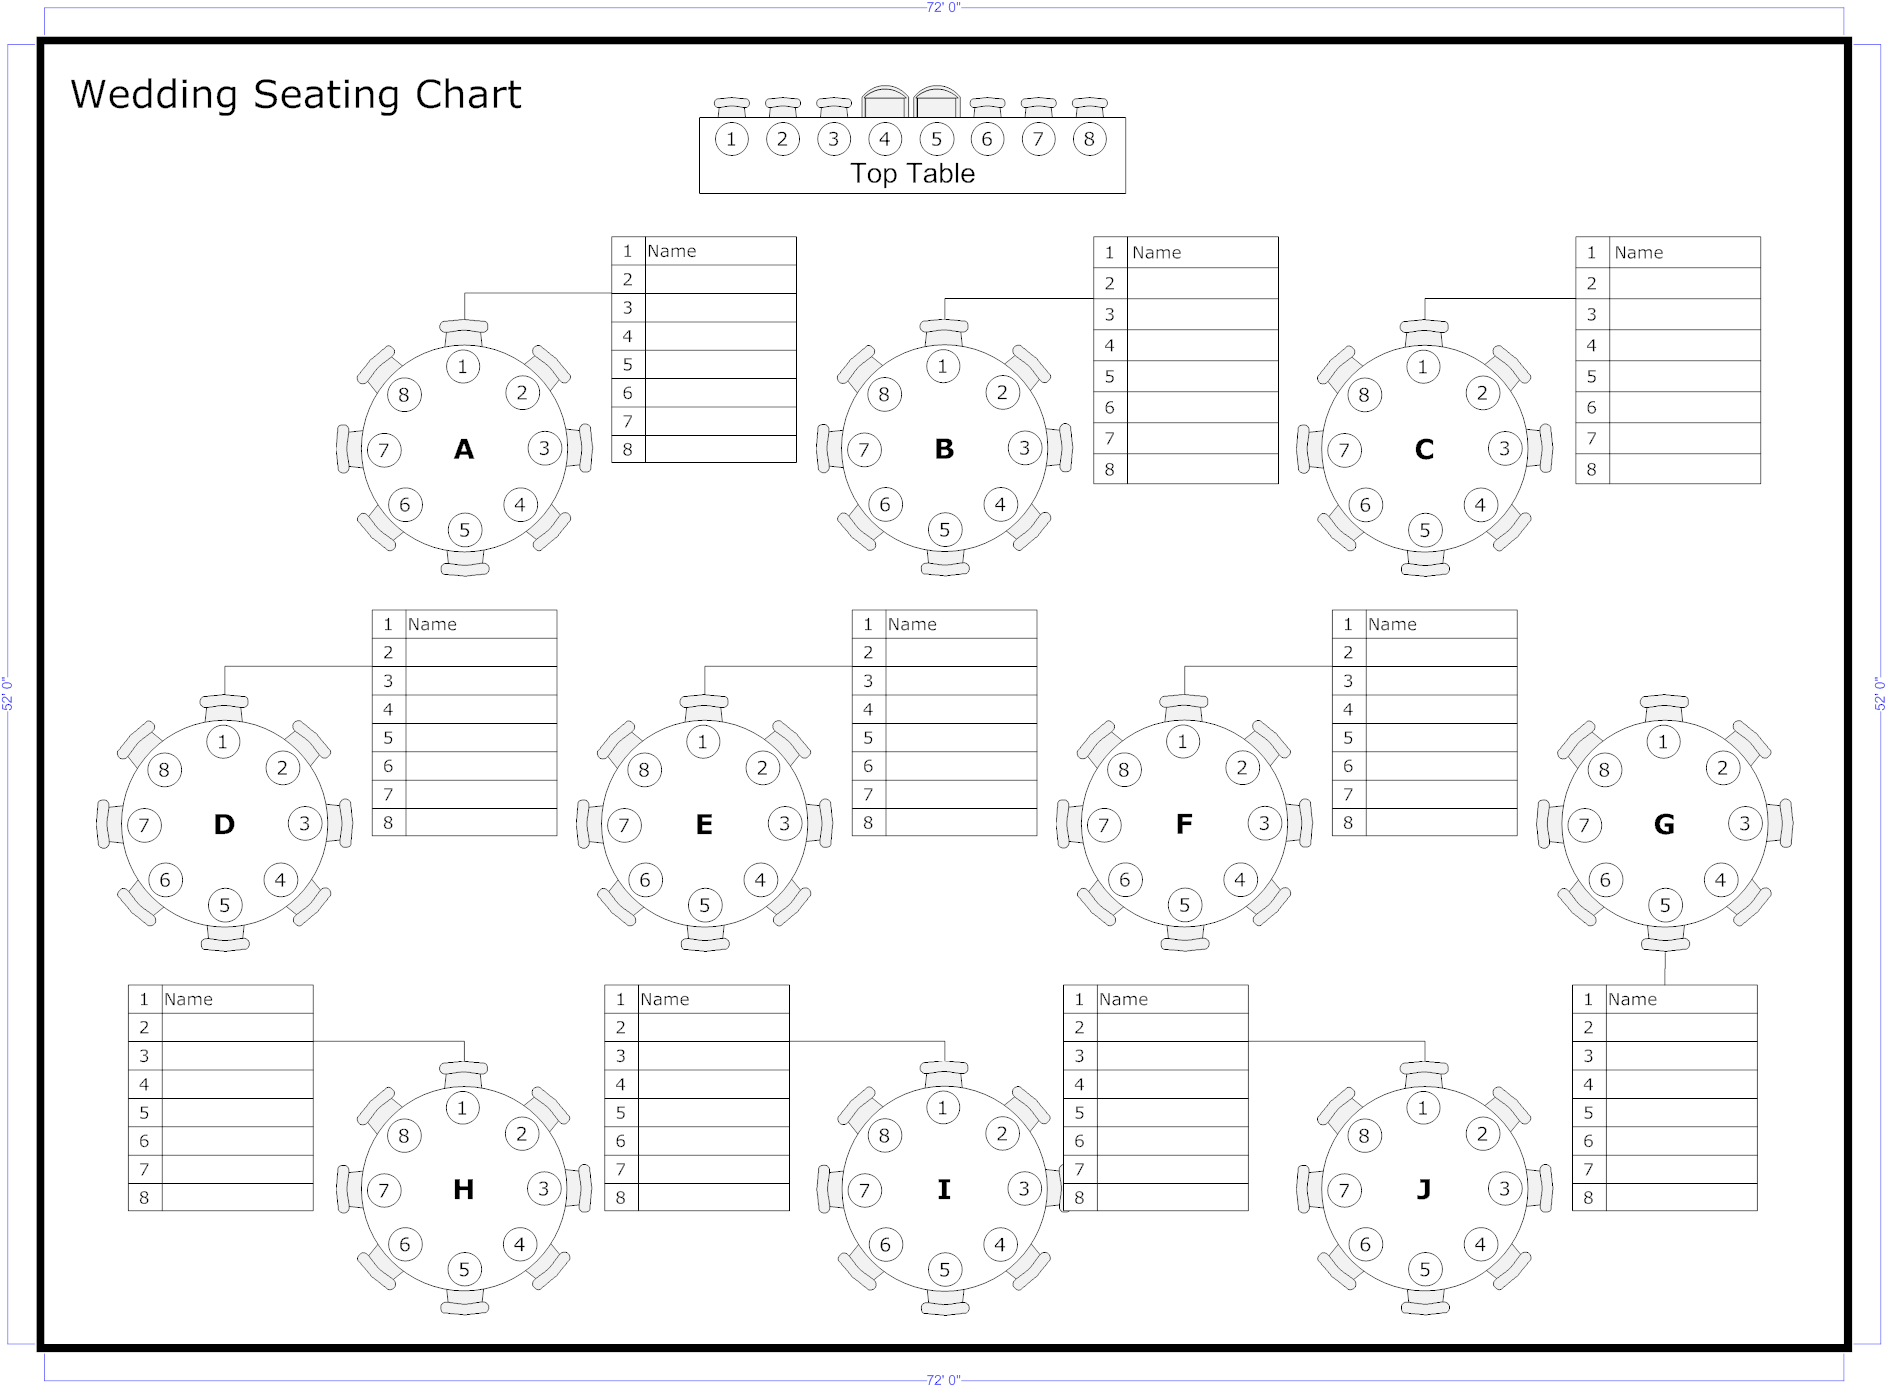 this-was-a-great-way-to-display-the-seating-chart-wedding